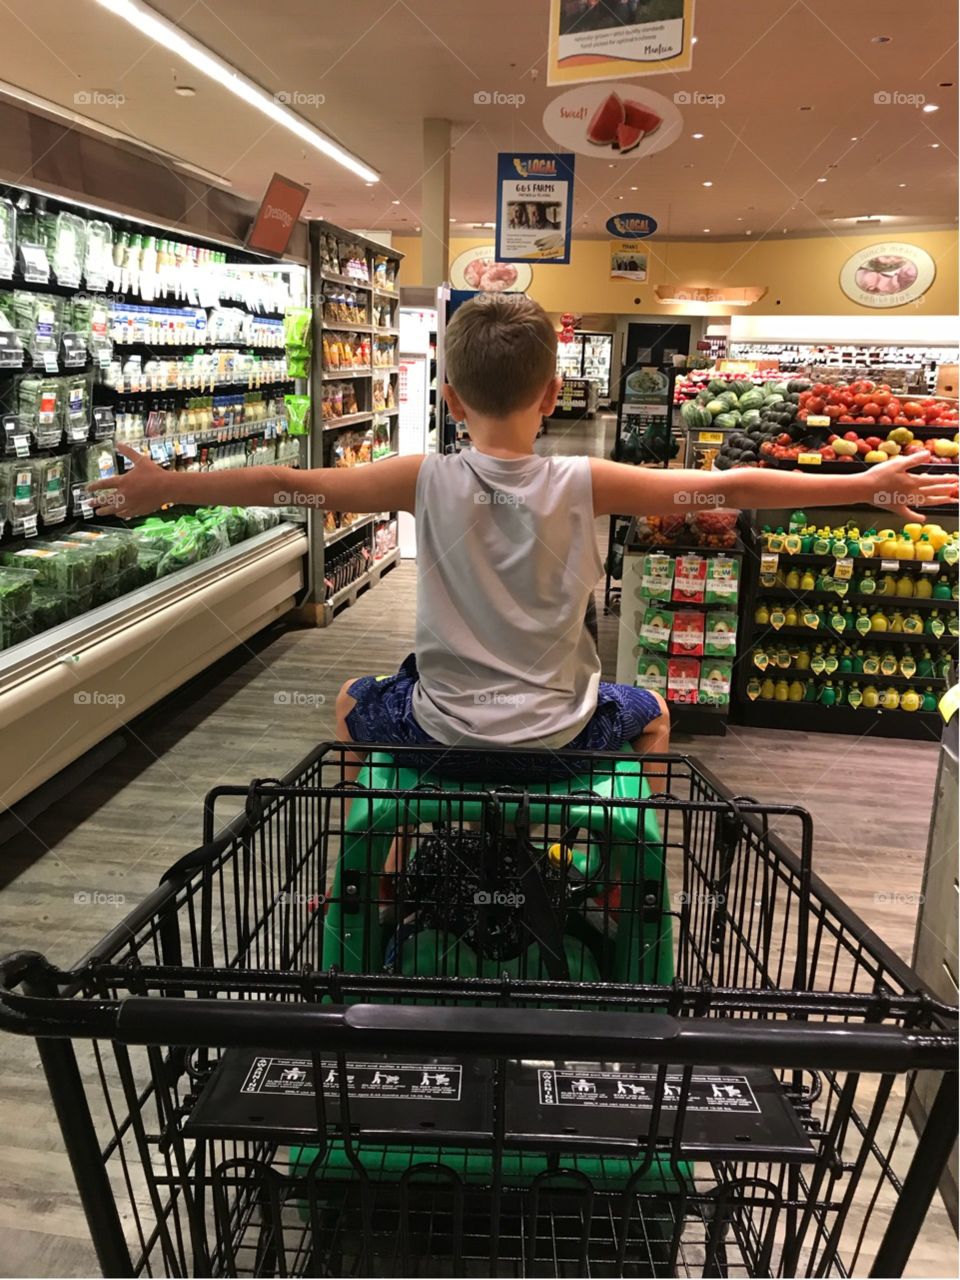 Grocery Shopping -the possibilities are endless - Healthy foods -Healthy life style - Happy child 